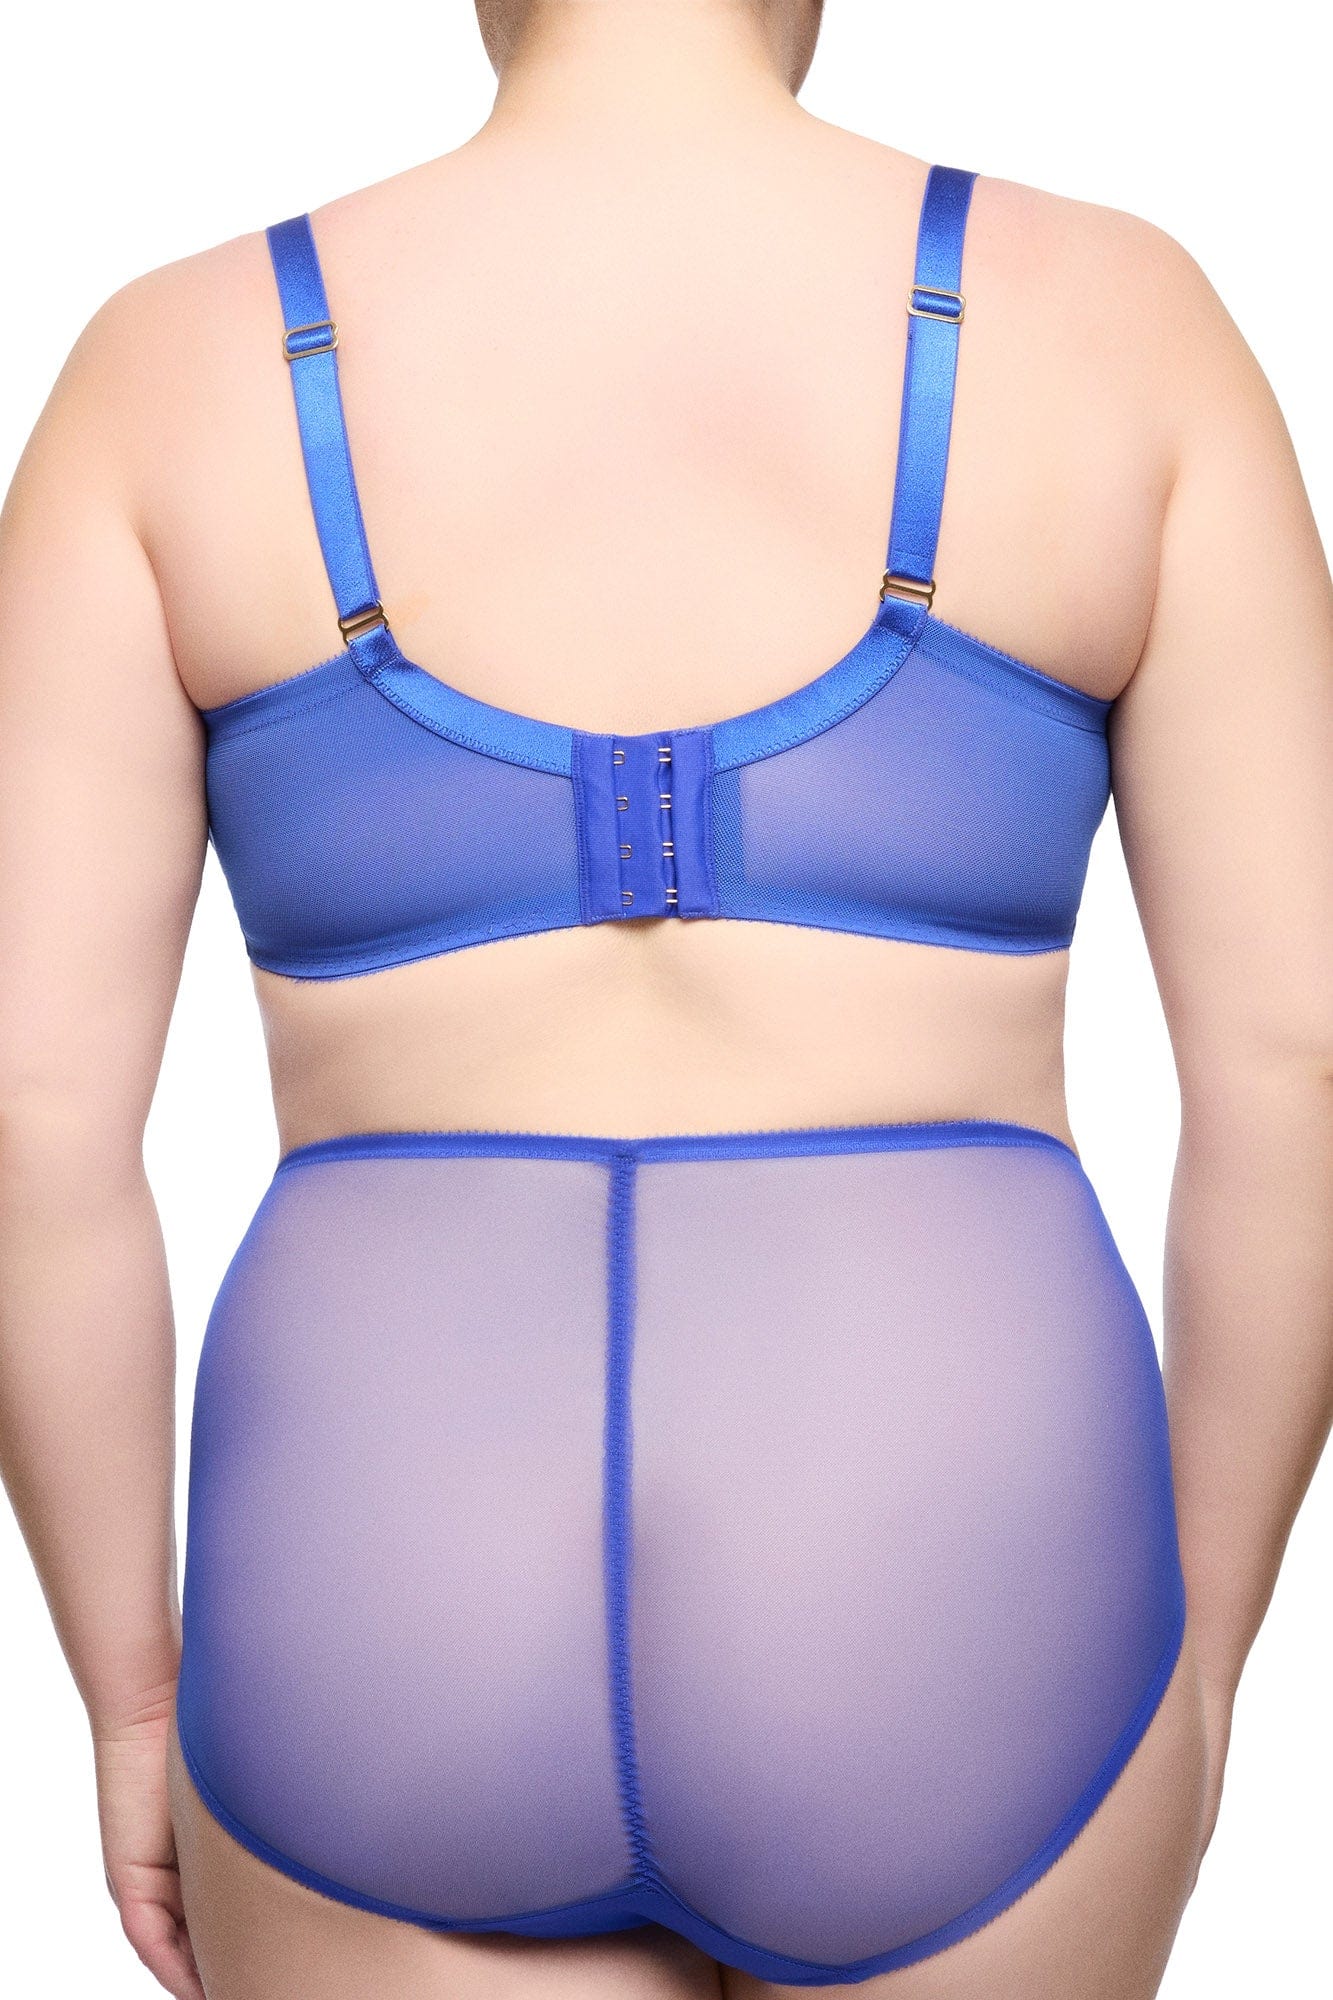 Aerie Bra Blue Size 34 E / DD - $19 (68% Off Retail) - From Valerie